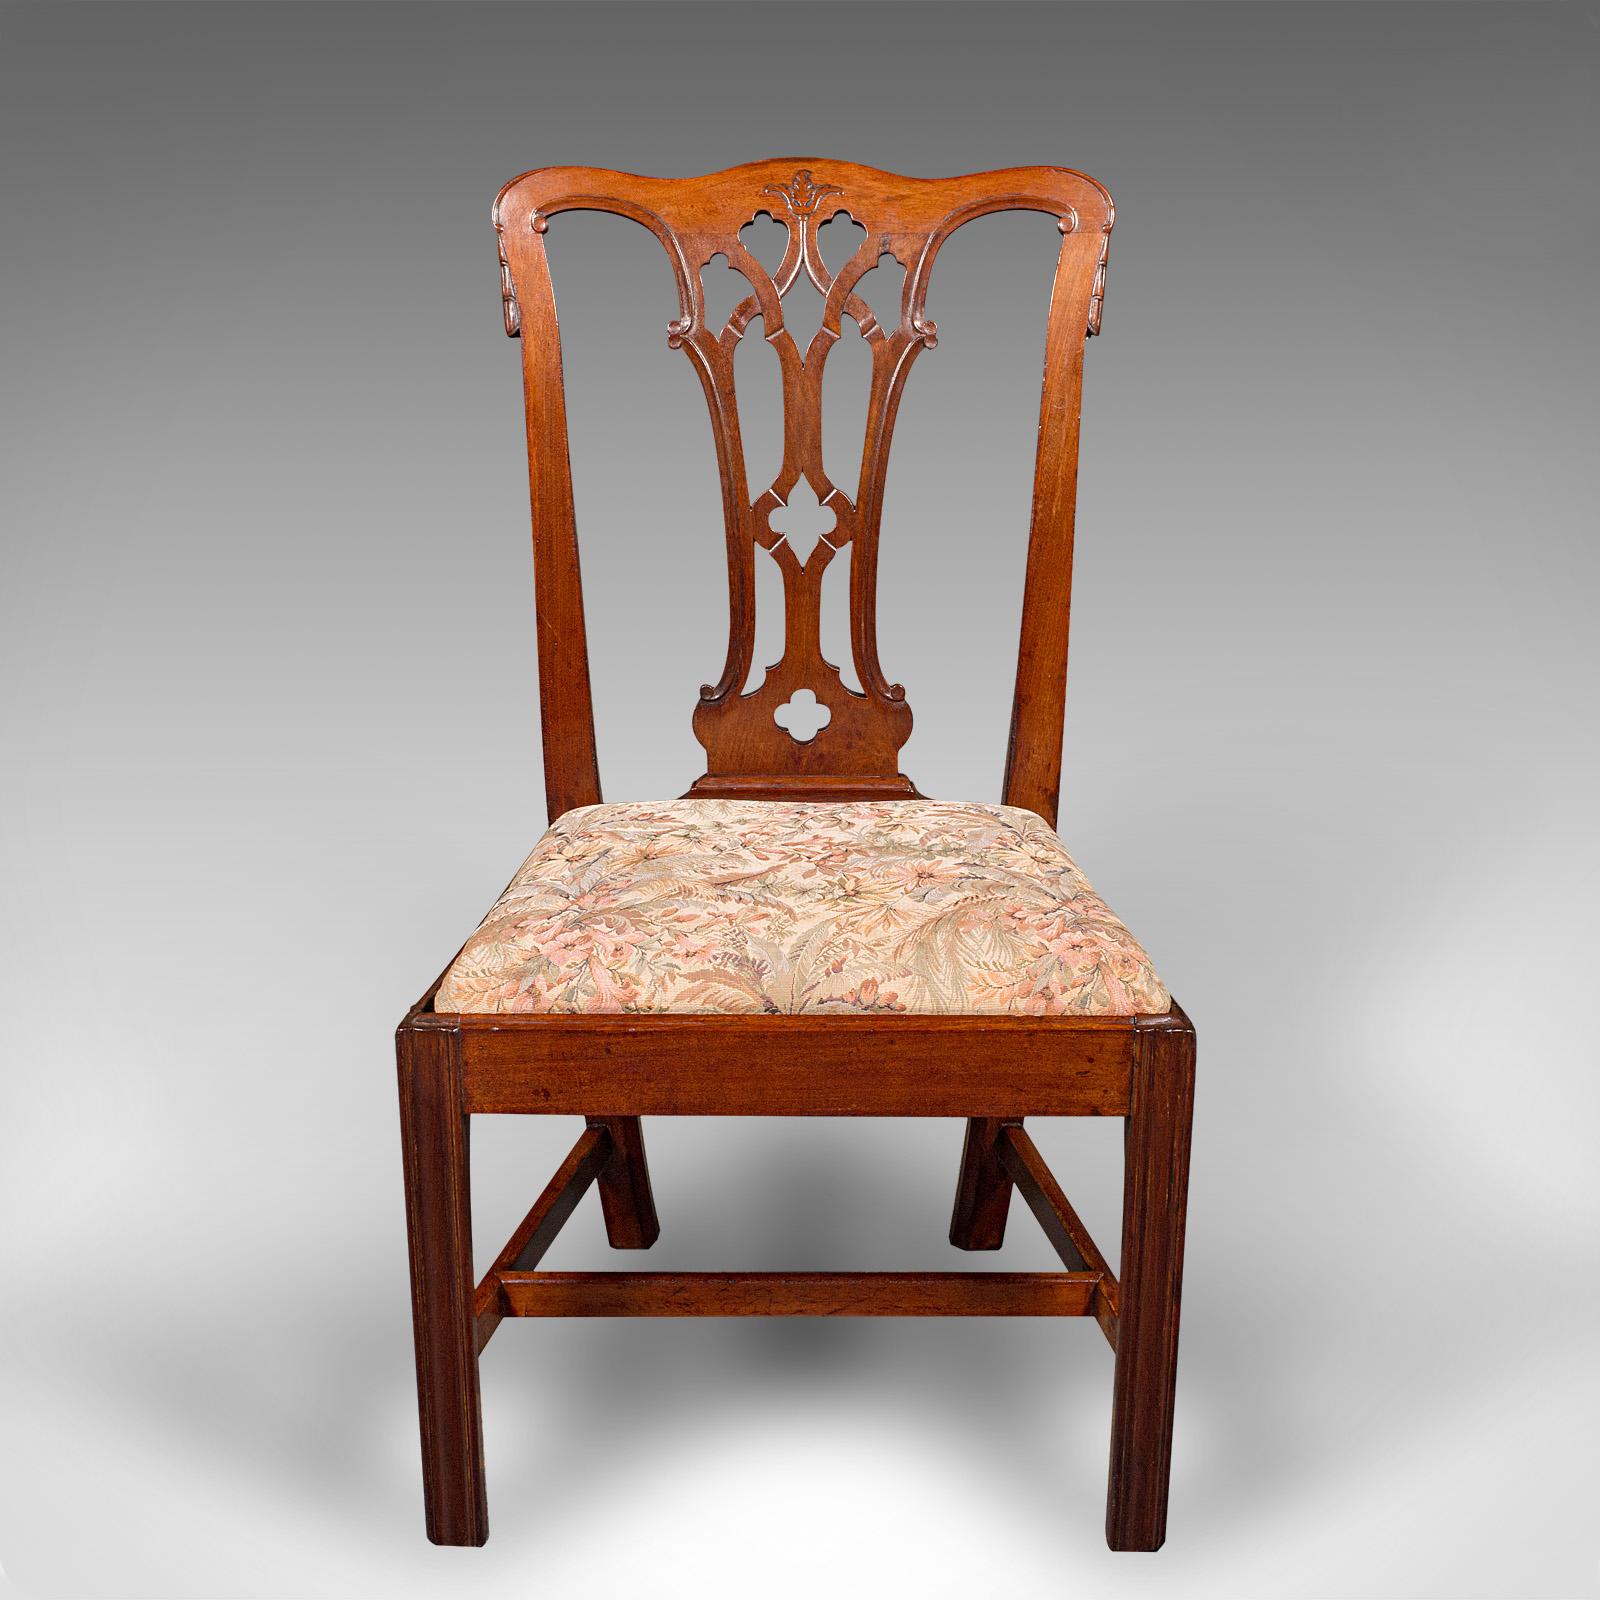 This is a set of 6 antique dining room chairs. An English, walnut seat in the Chippendale manner, dating to the Georgian period, circa 1800.

Superb Chippendale revival chairs, with appealing upholstery and generous width
Displaying a desirable